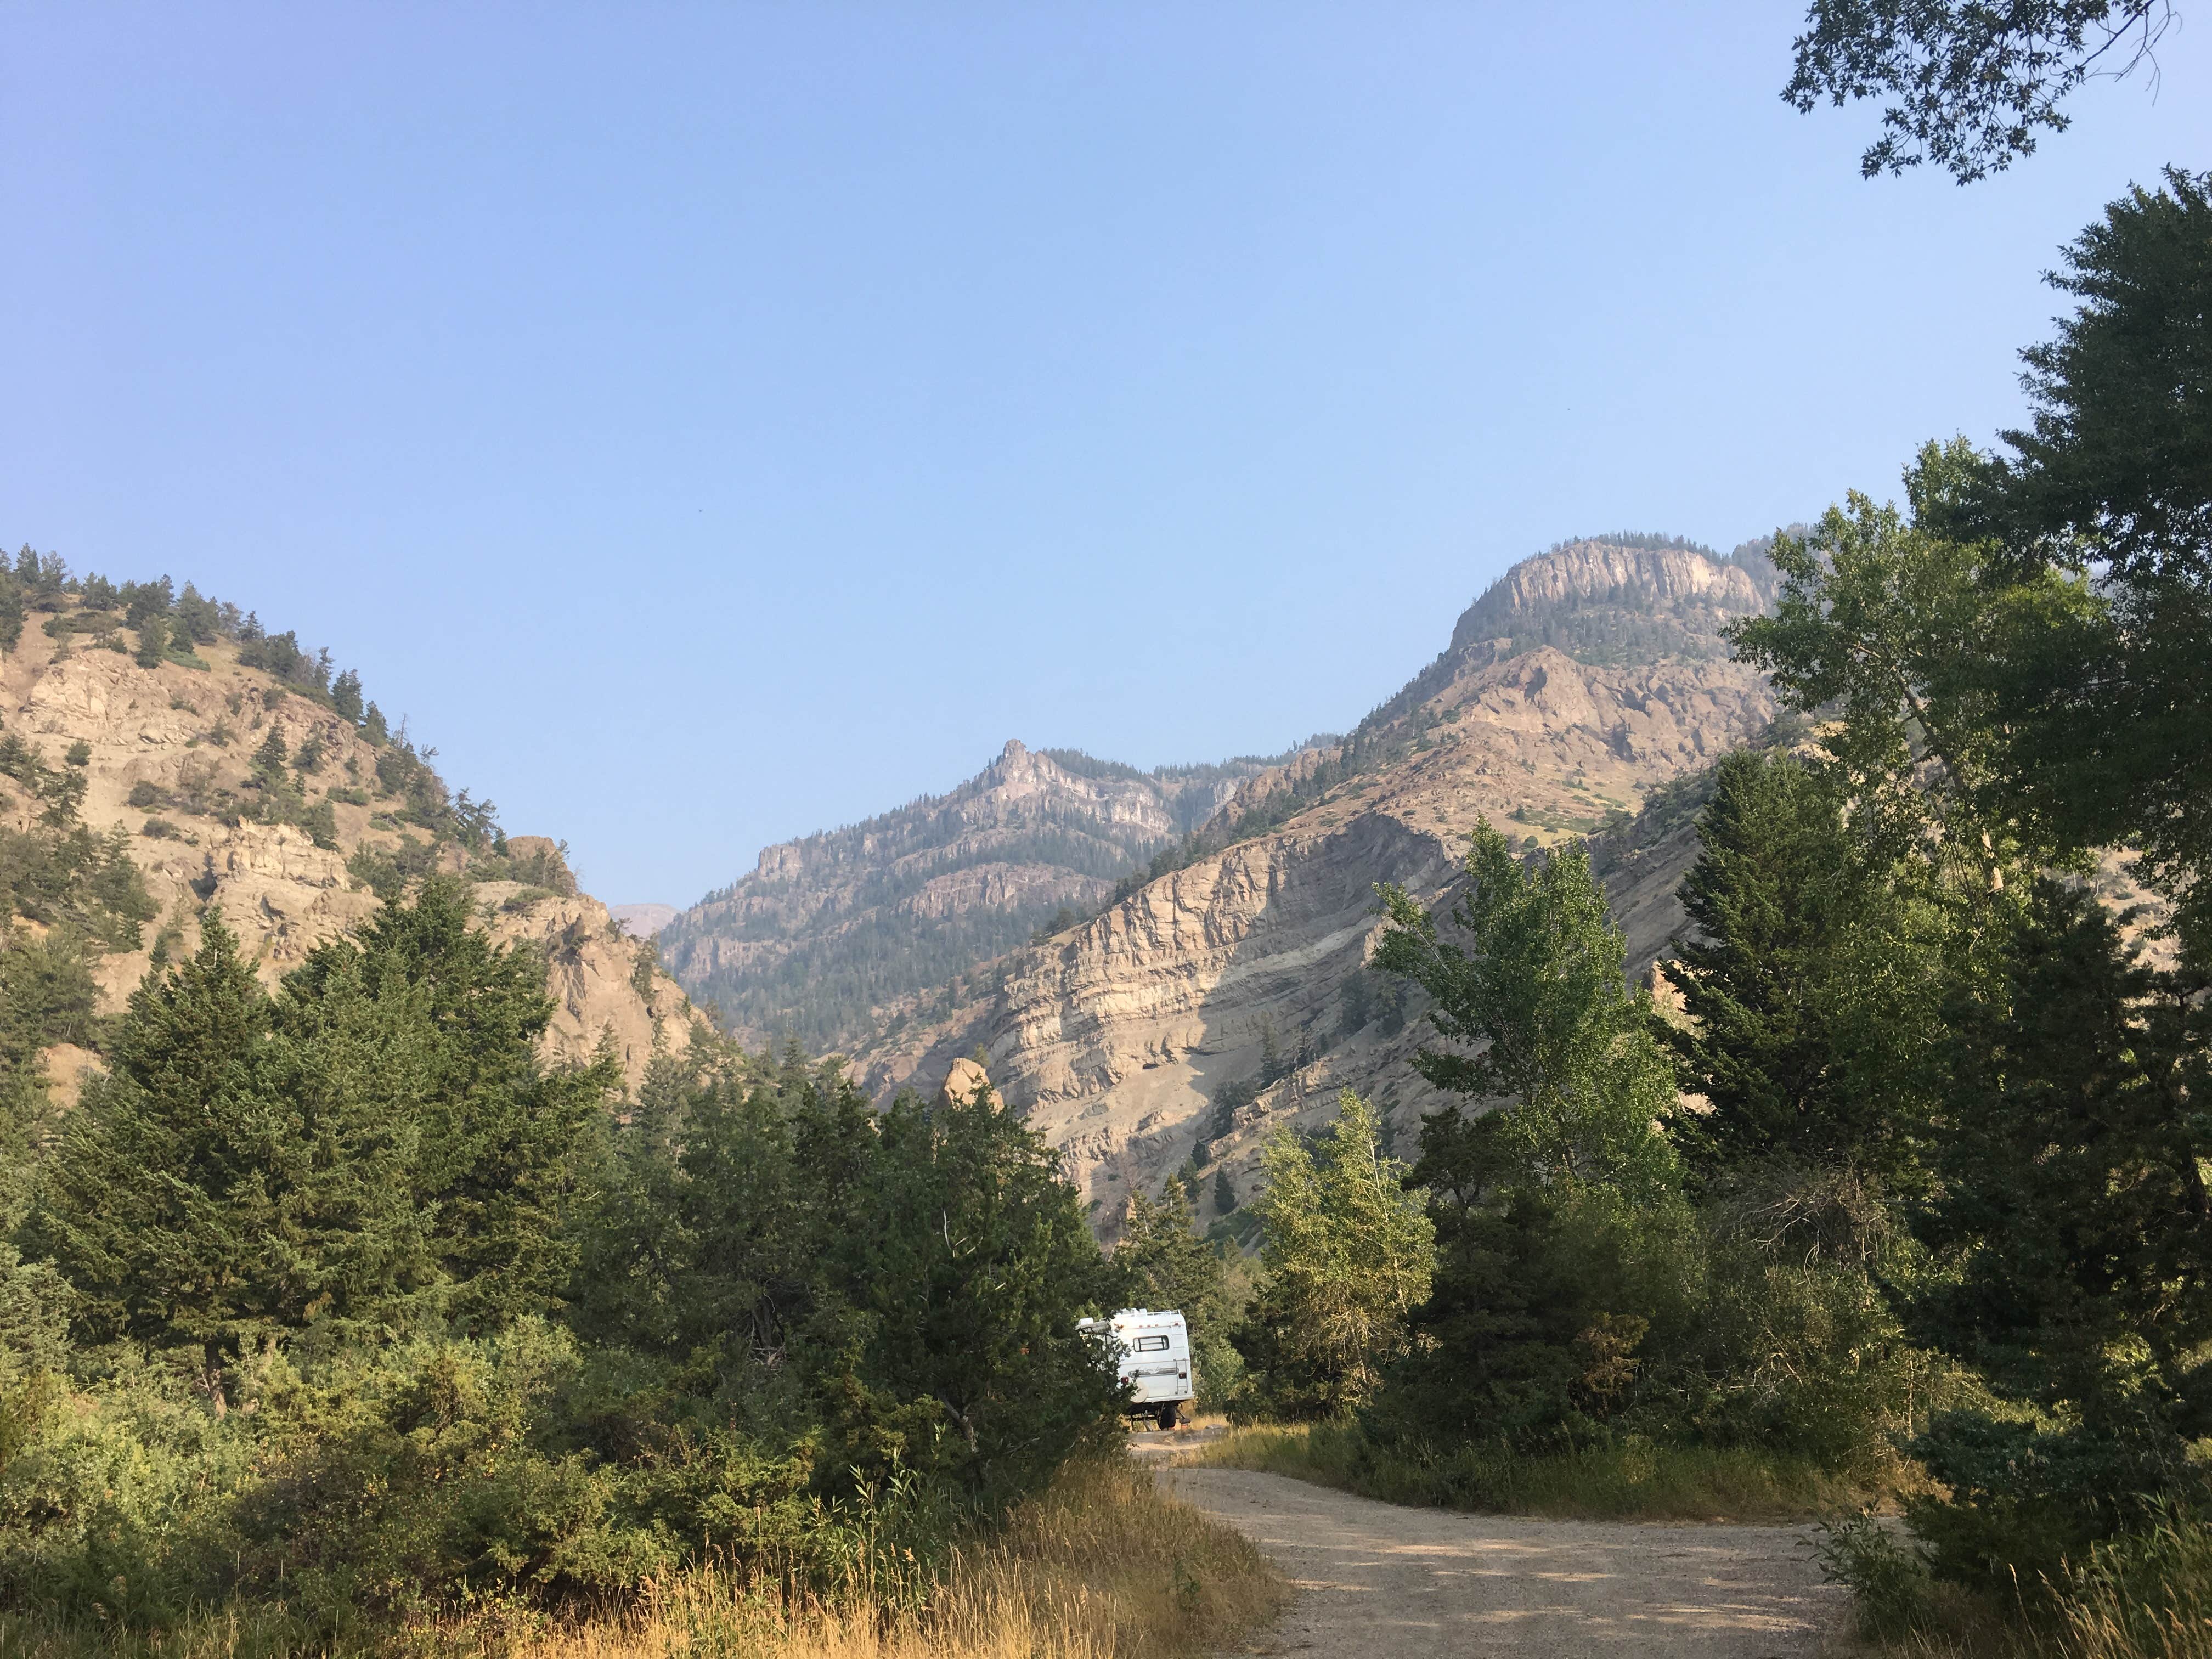 Camper submitted image from Deer Creek - 3